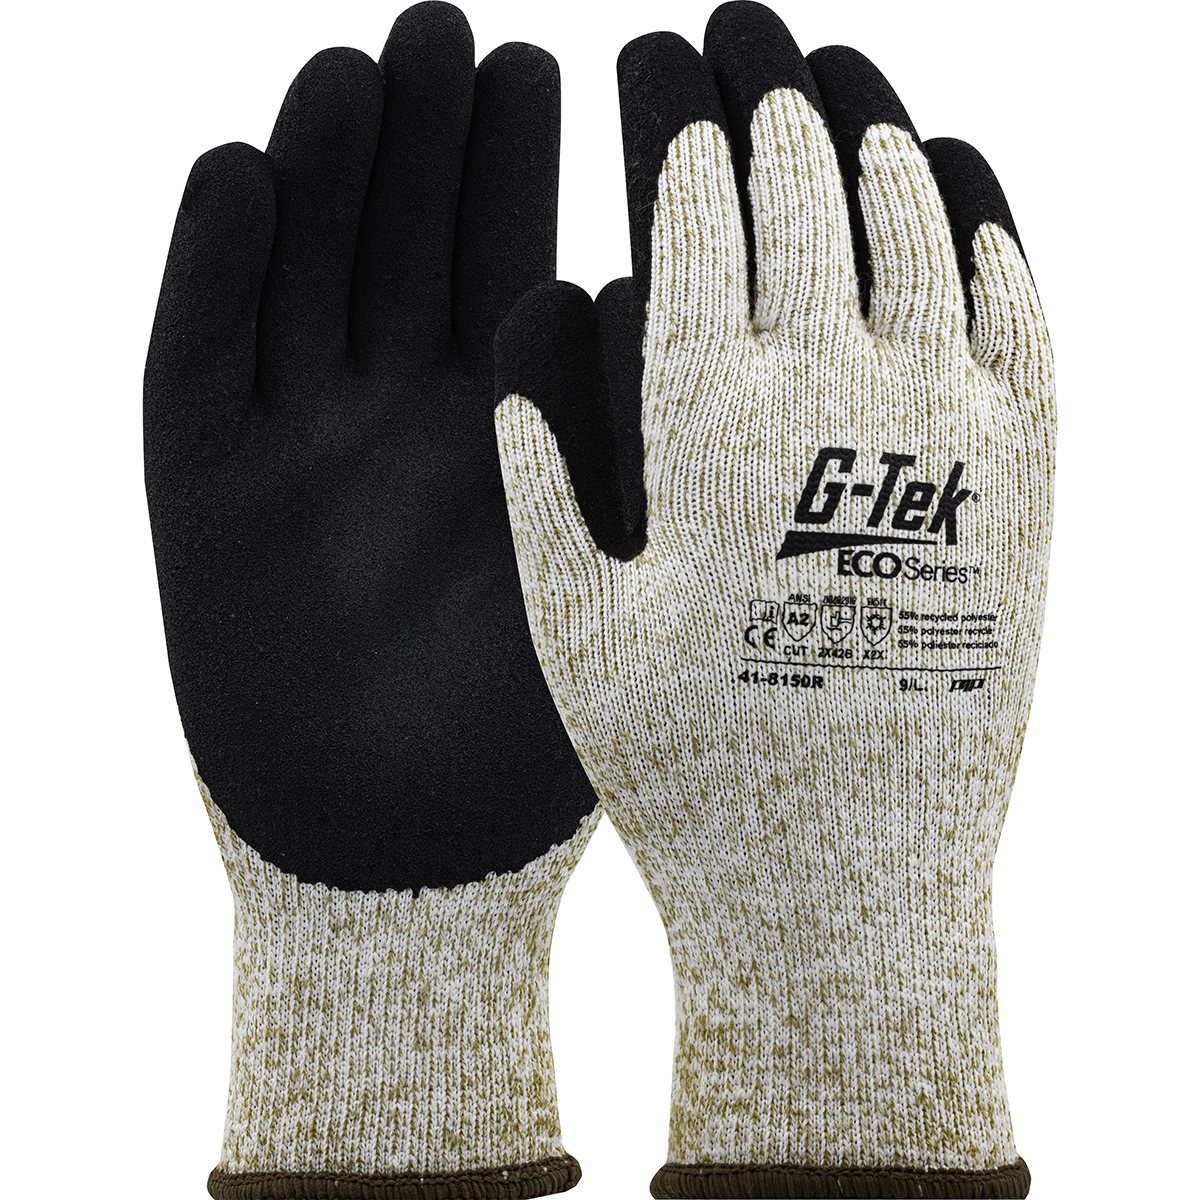 # 41 - 8150 r PIP®G-Tek®生态系列™Microsurface Latex Coated  Seamless Knit A2 Cut Resistant Work Safety Gloves